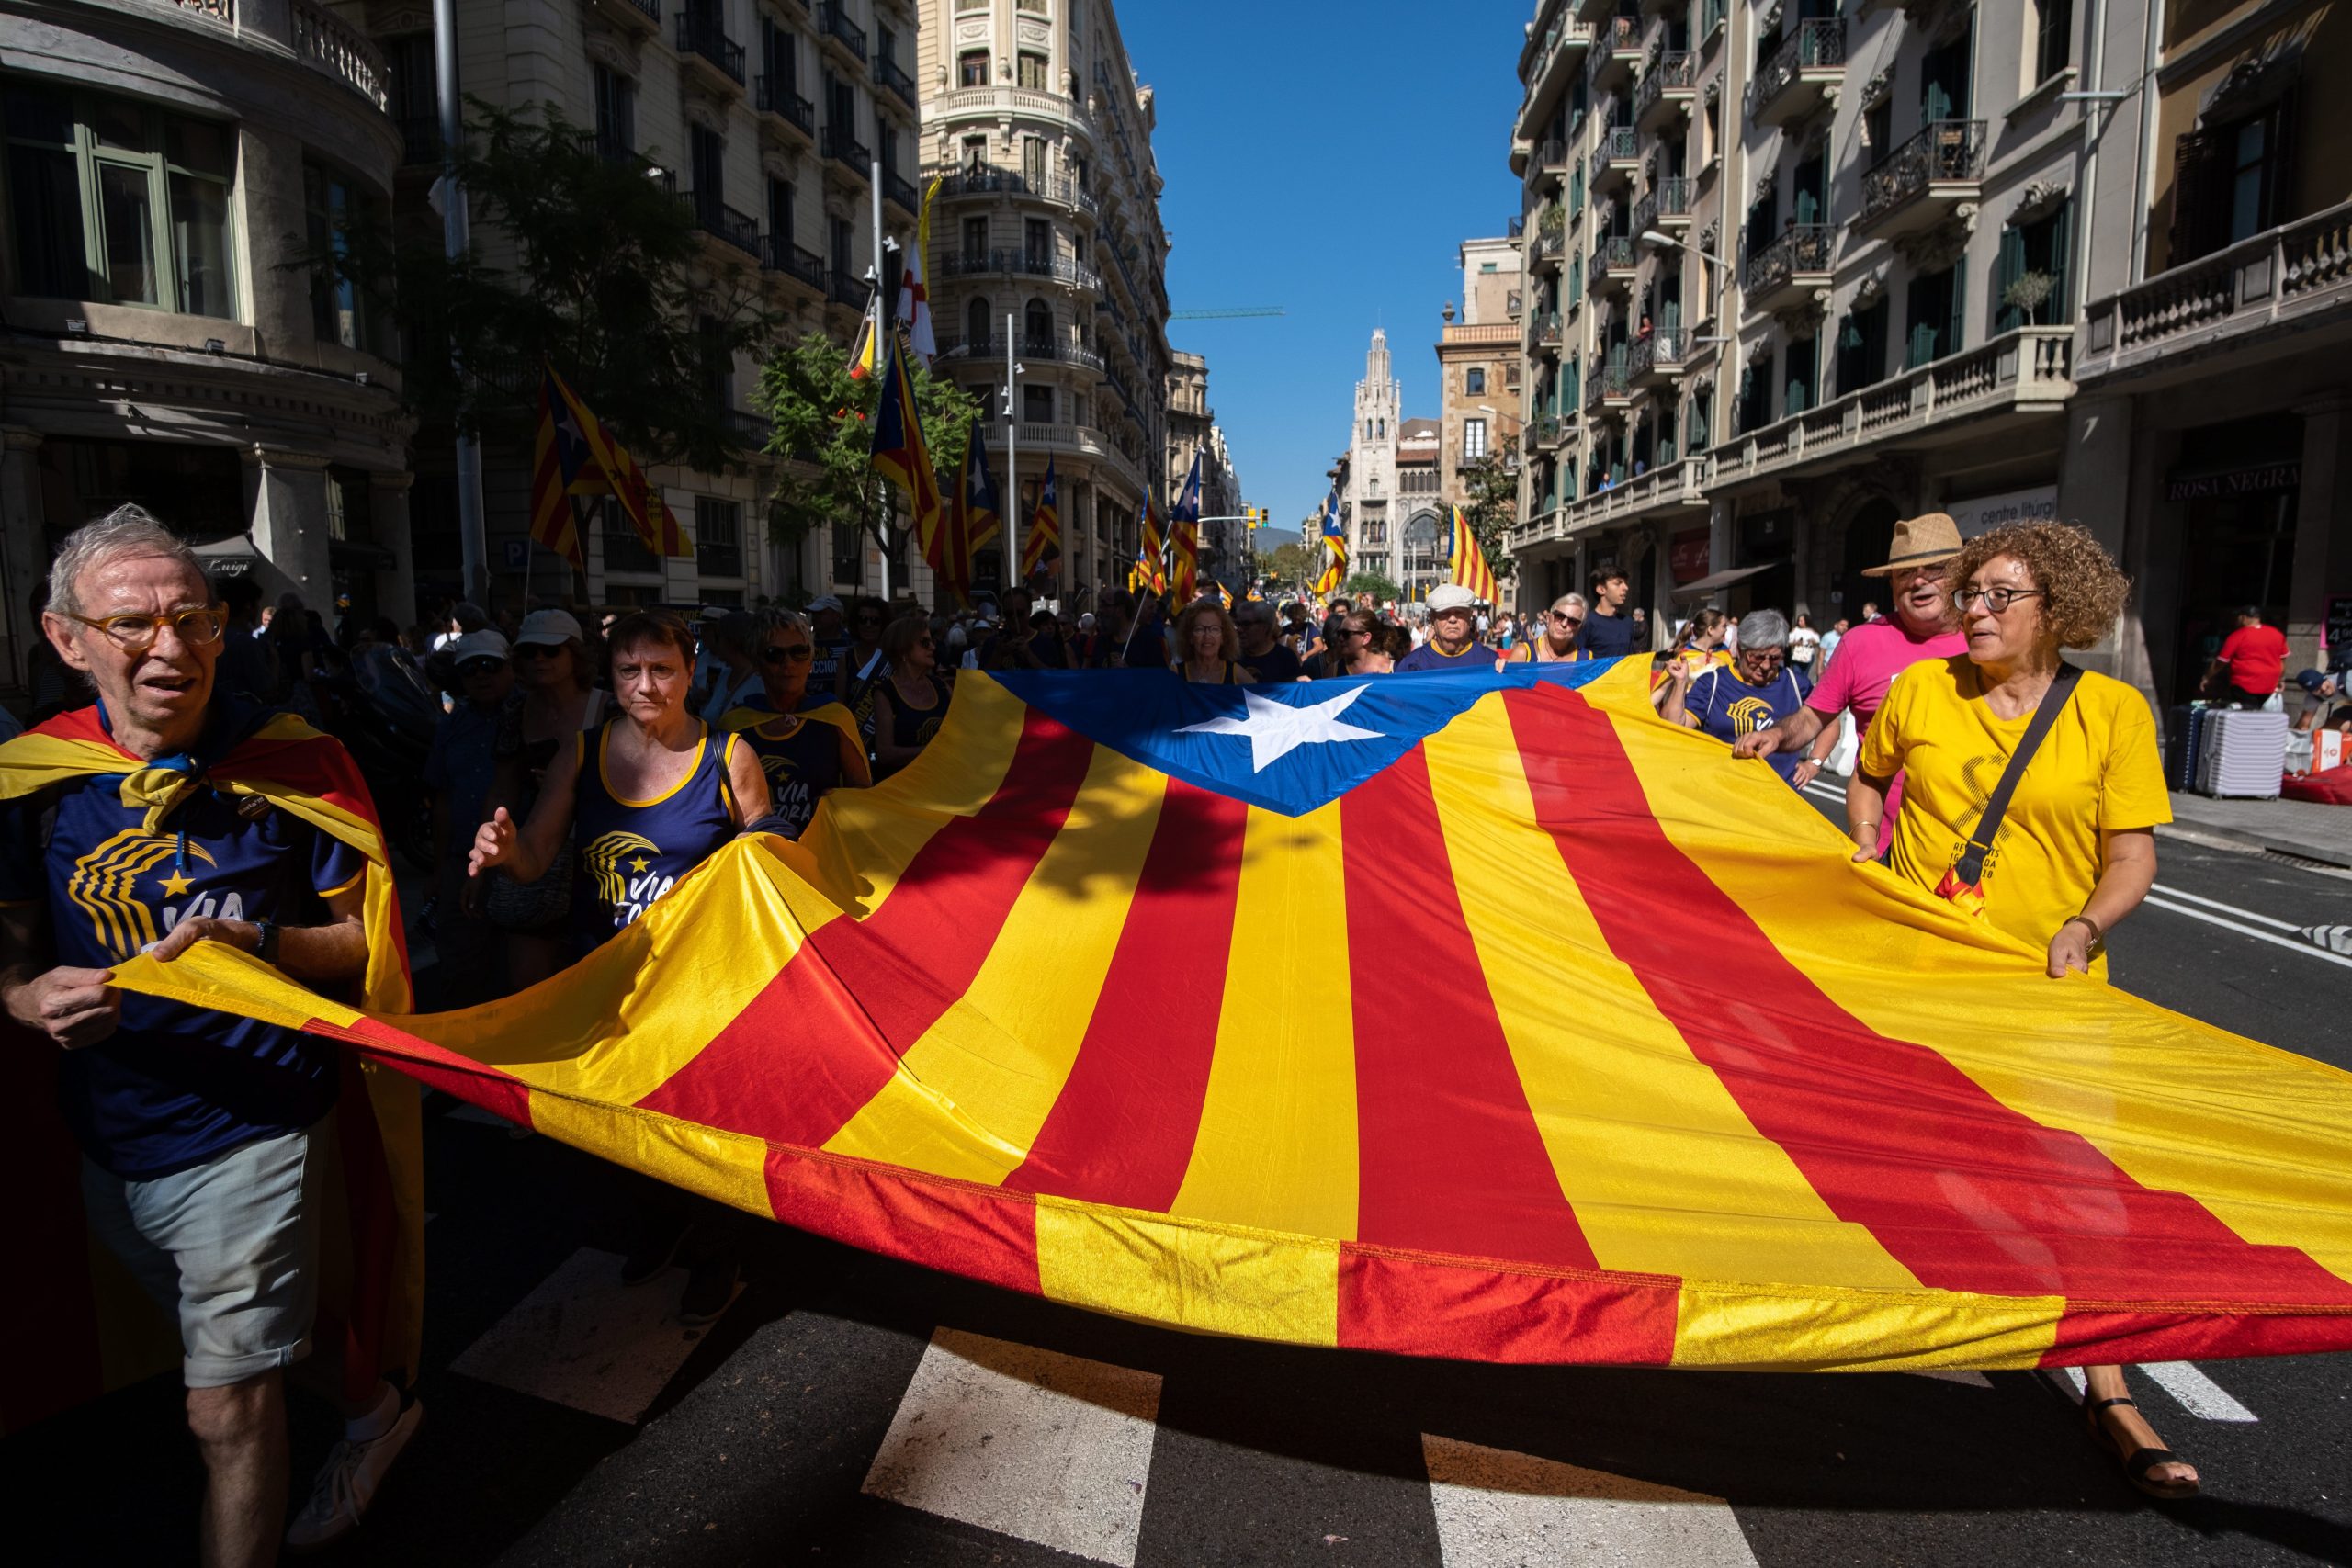 Catalunya would vote to remain a part of Spain by a comfortable margin if an independence referendum were held today, new poll shows